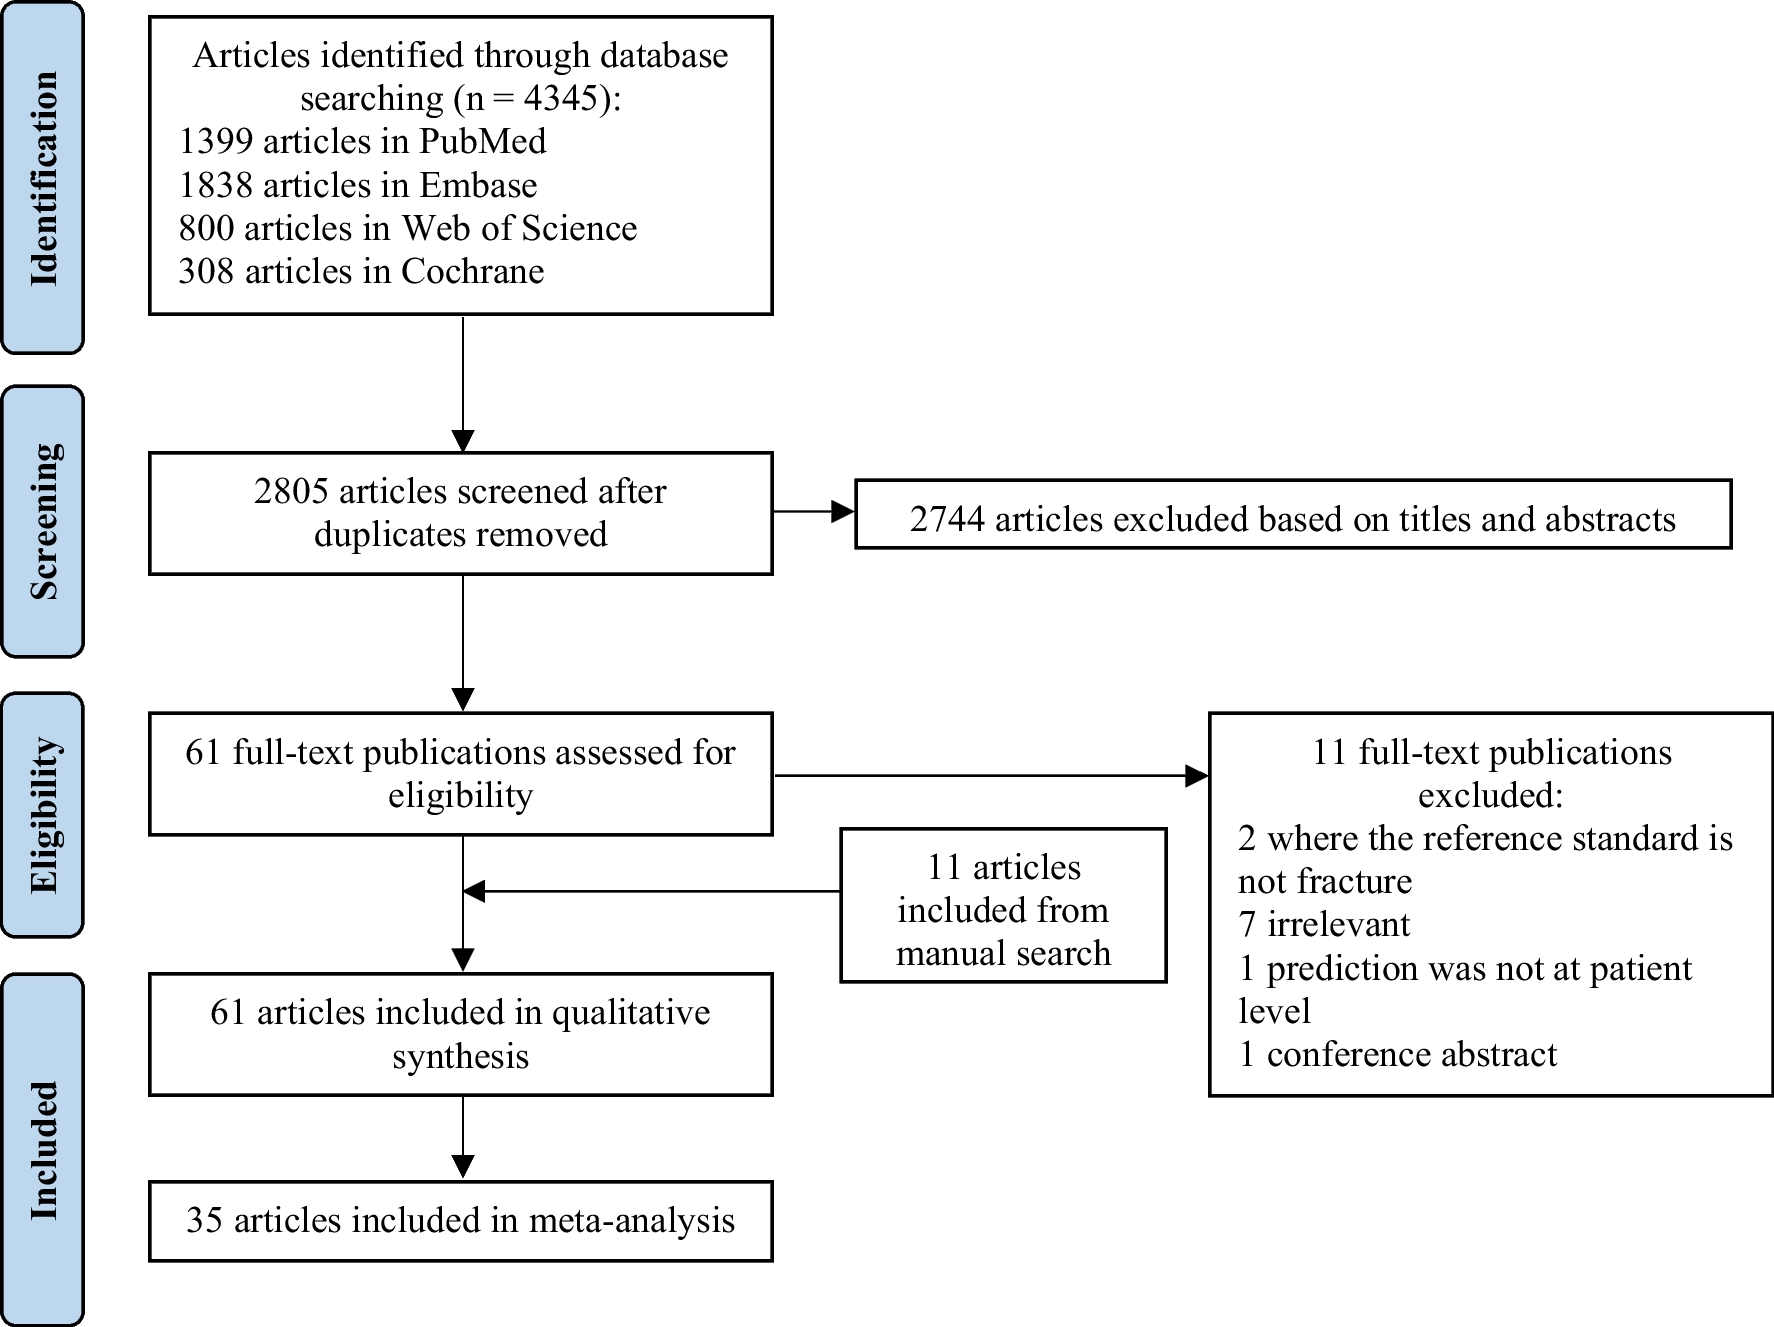 CT image-based biomarkers for opportunistic screening of osteoporotic fractures: a systematic review and meta-analysis